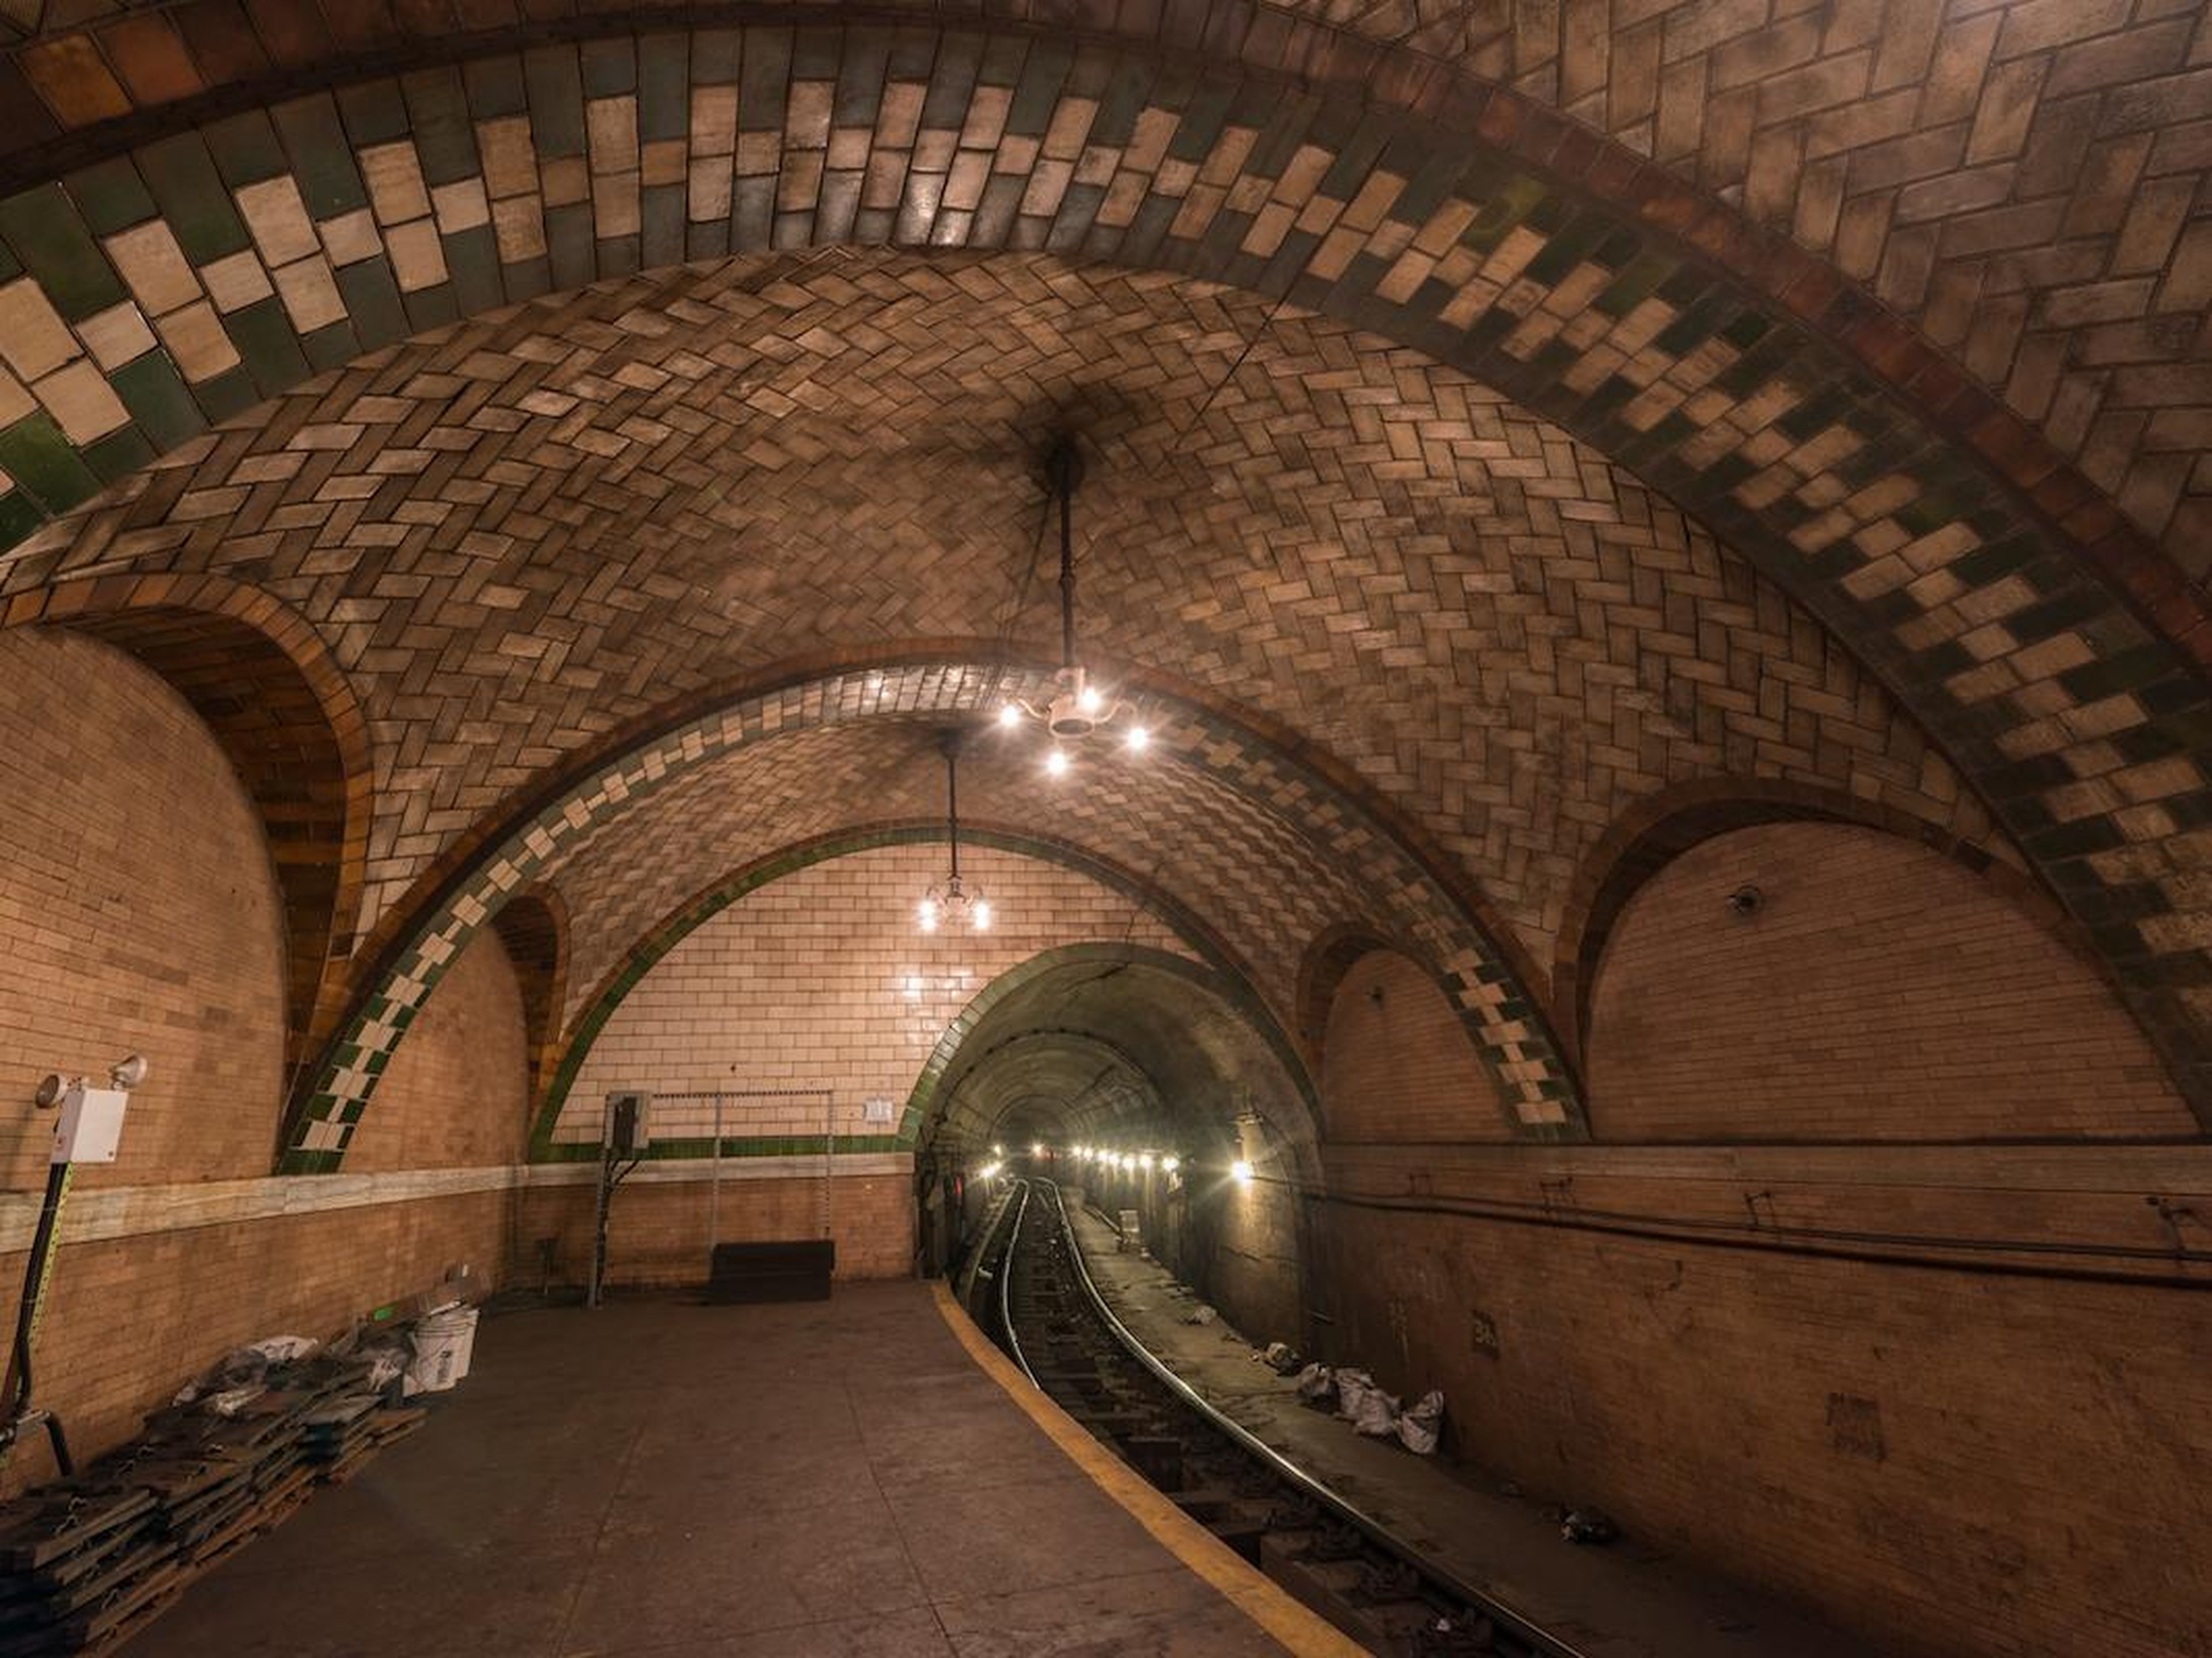 You can see City Hall station if you stay on the 6 train after its last stop.